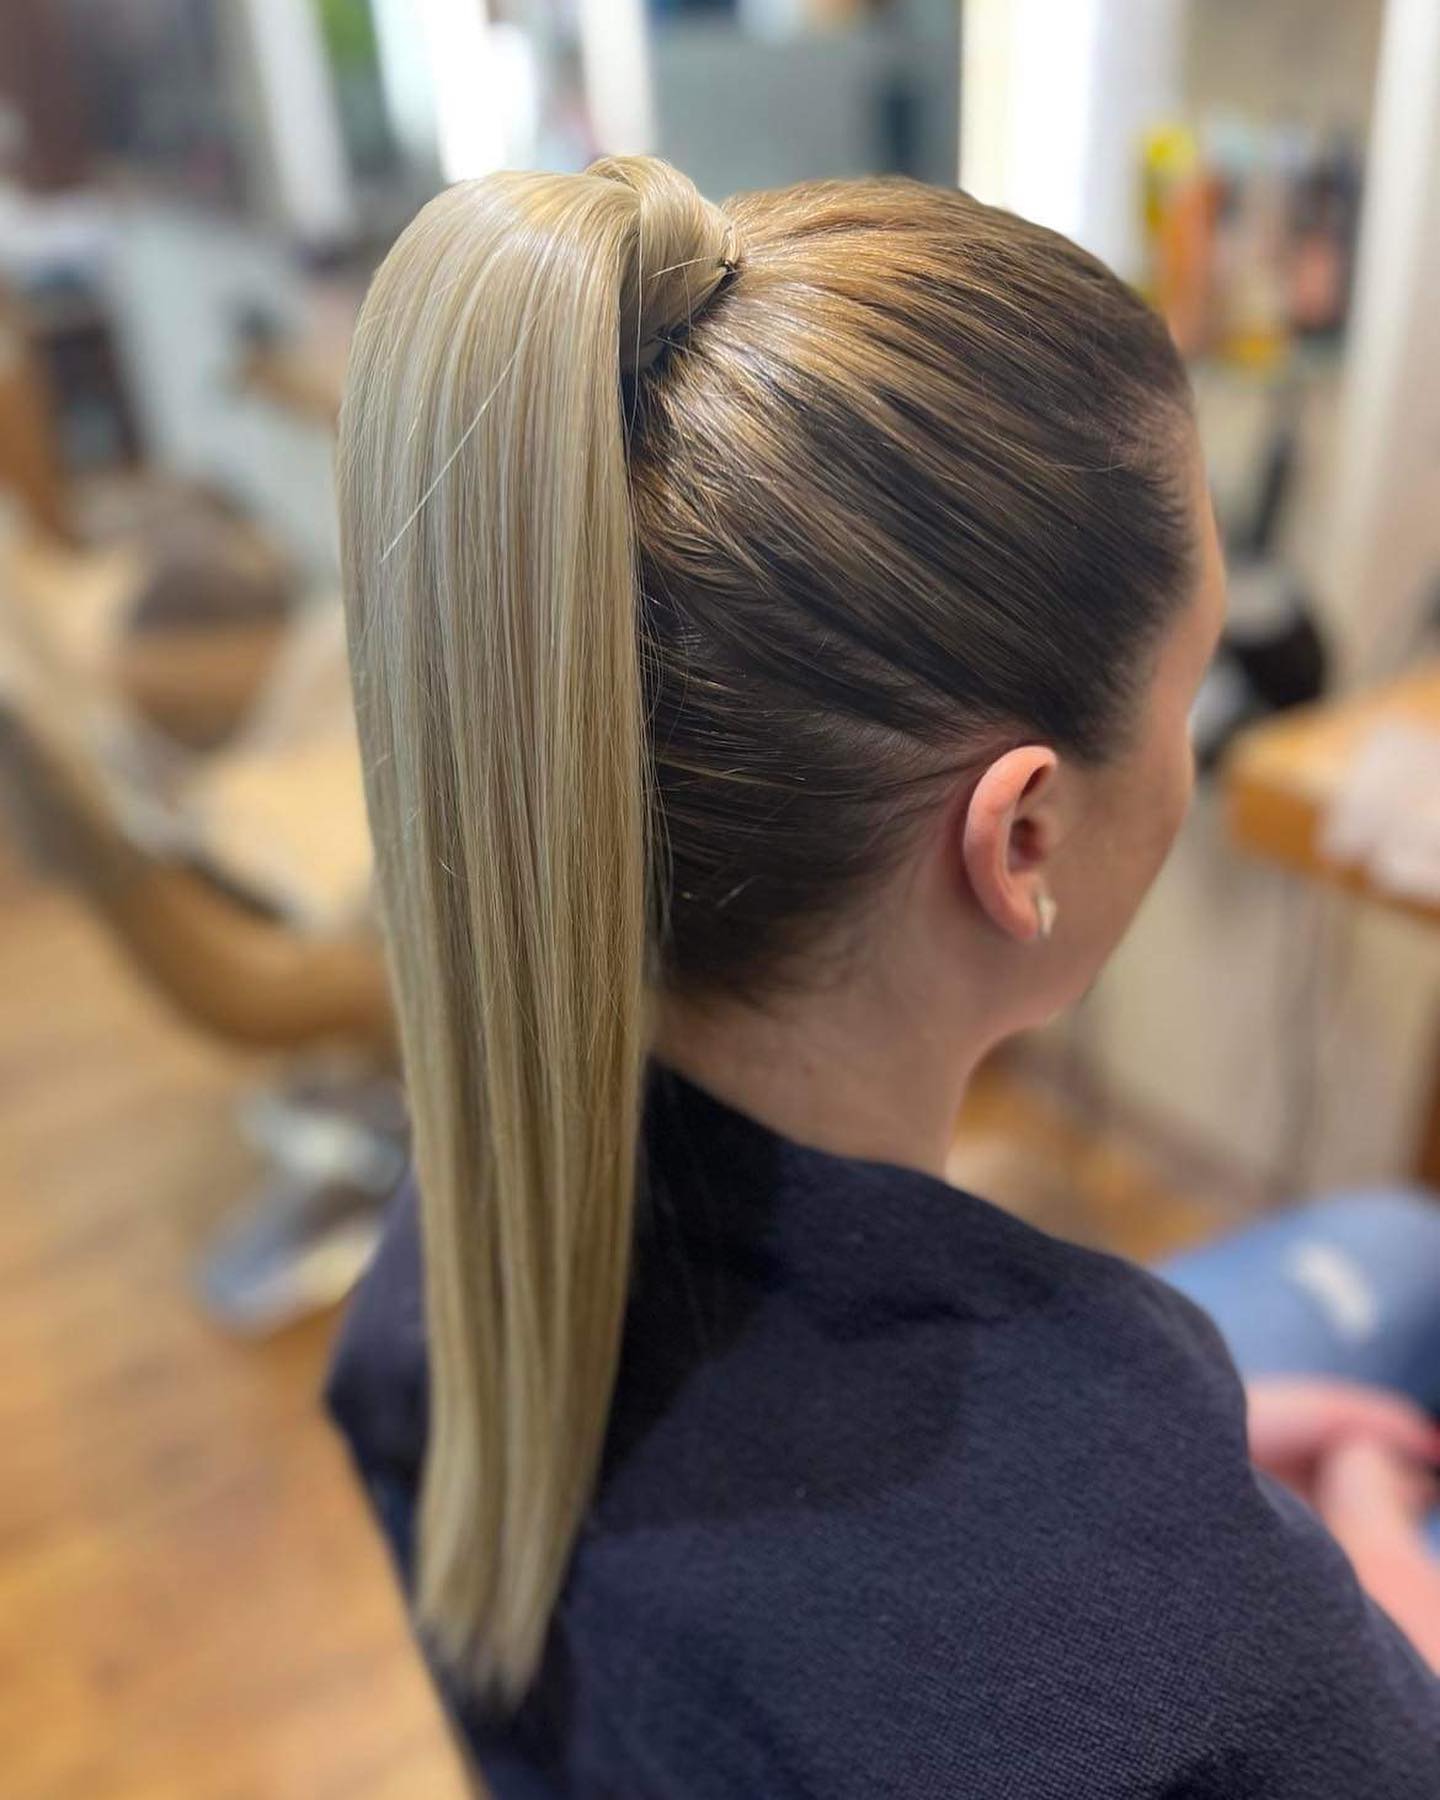 Sleek Ponytail Hairstyles - CHIC HIGH PONYTAIL Our next hair idea is very  elegant. The hair is styled into a high, sleek ponytail. It is very simple  but it looks stunning. This